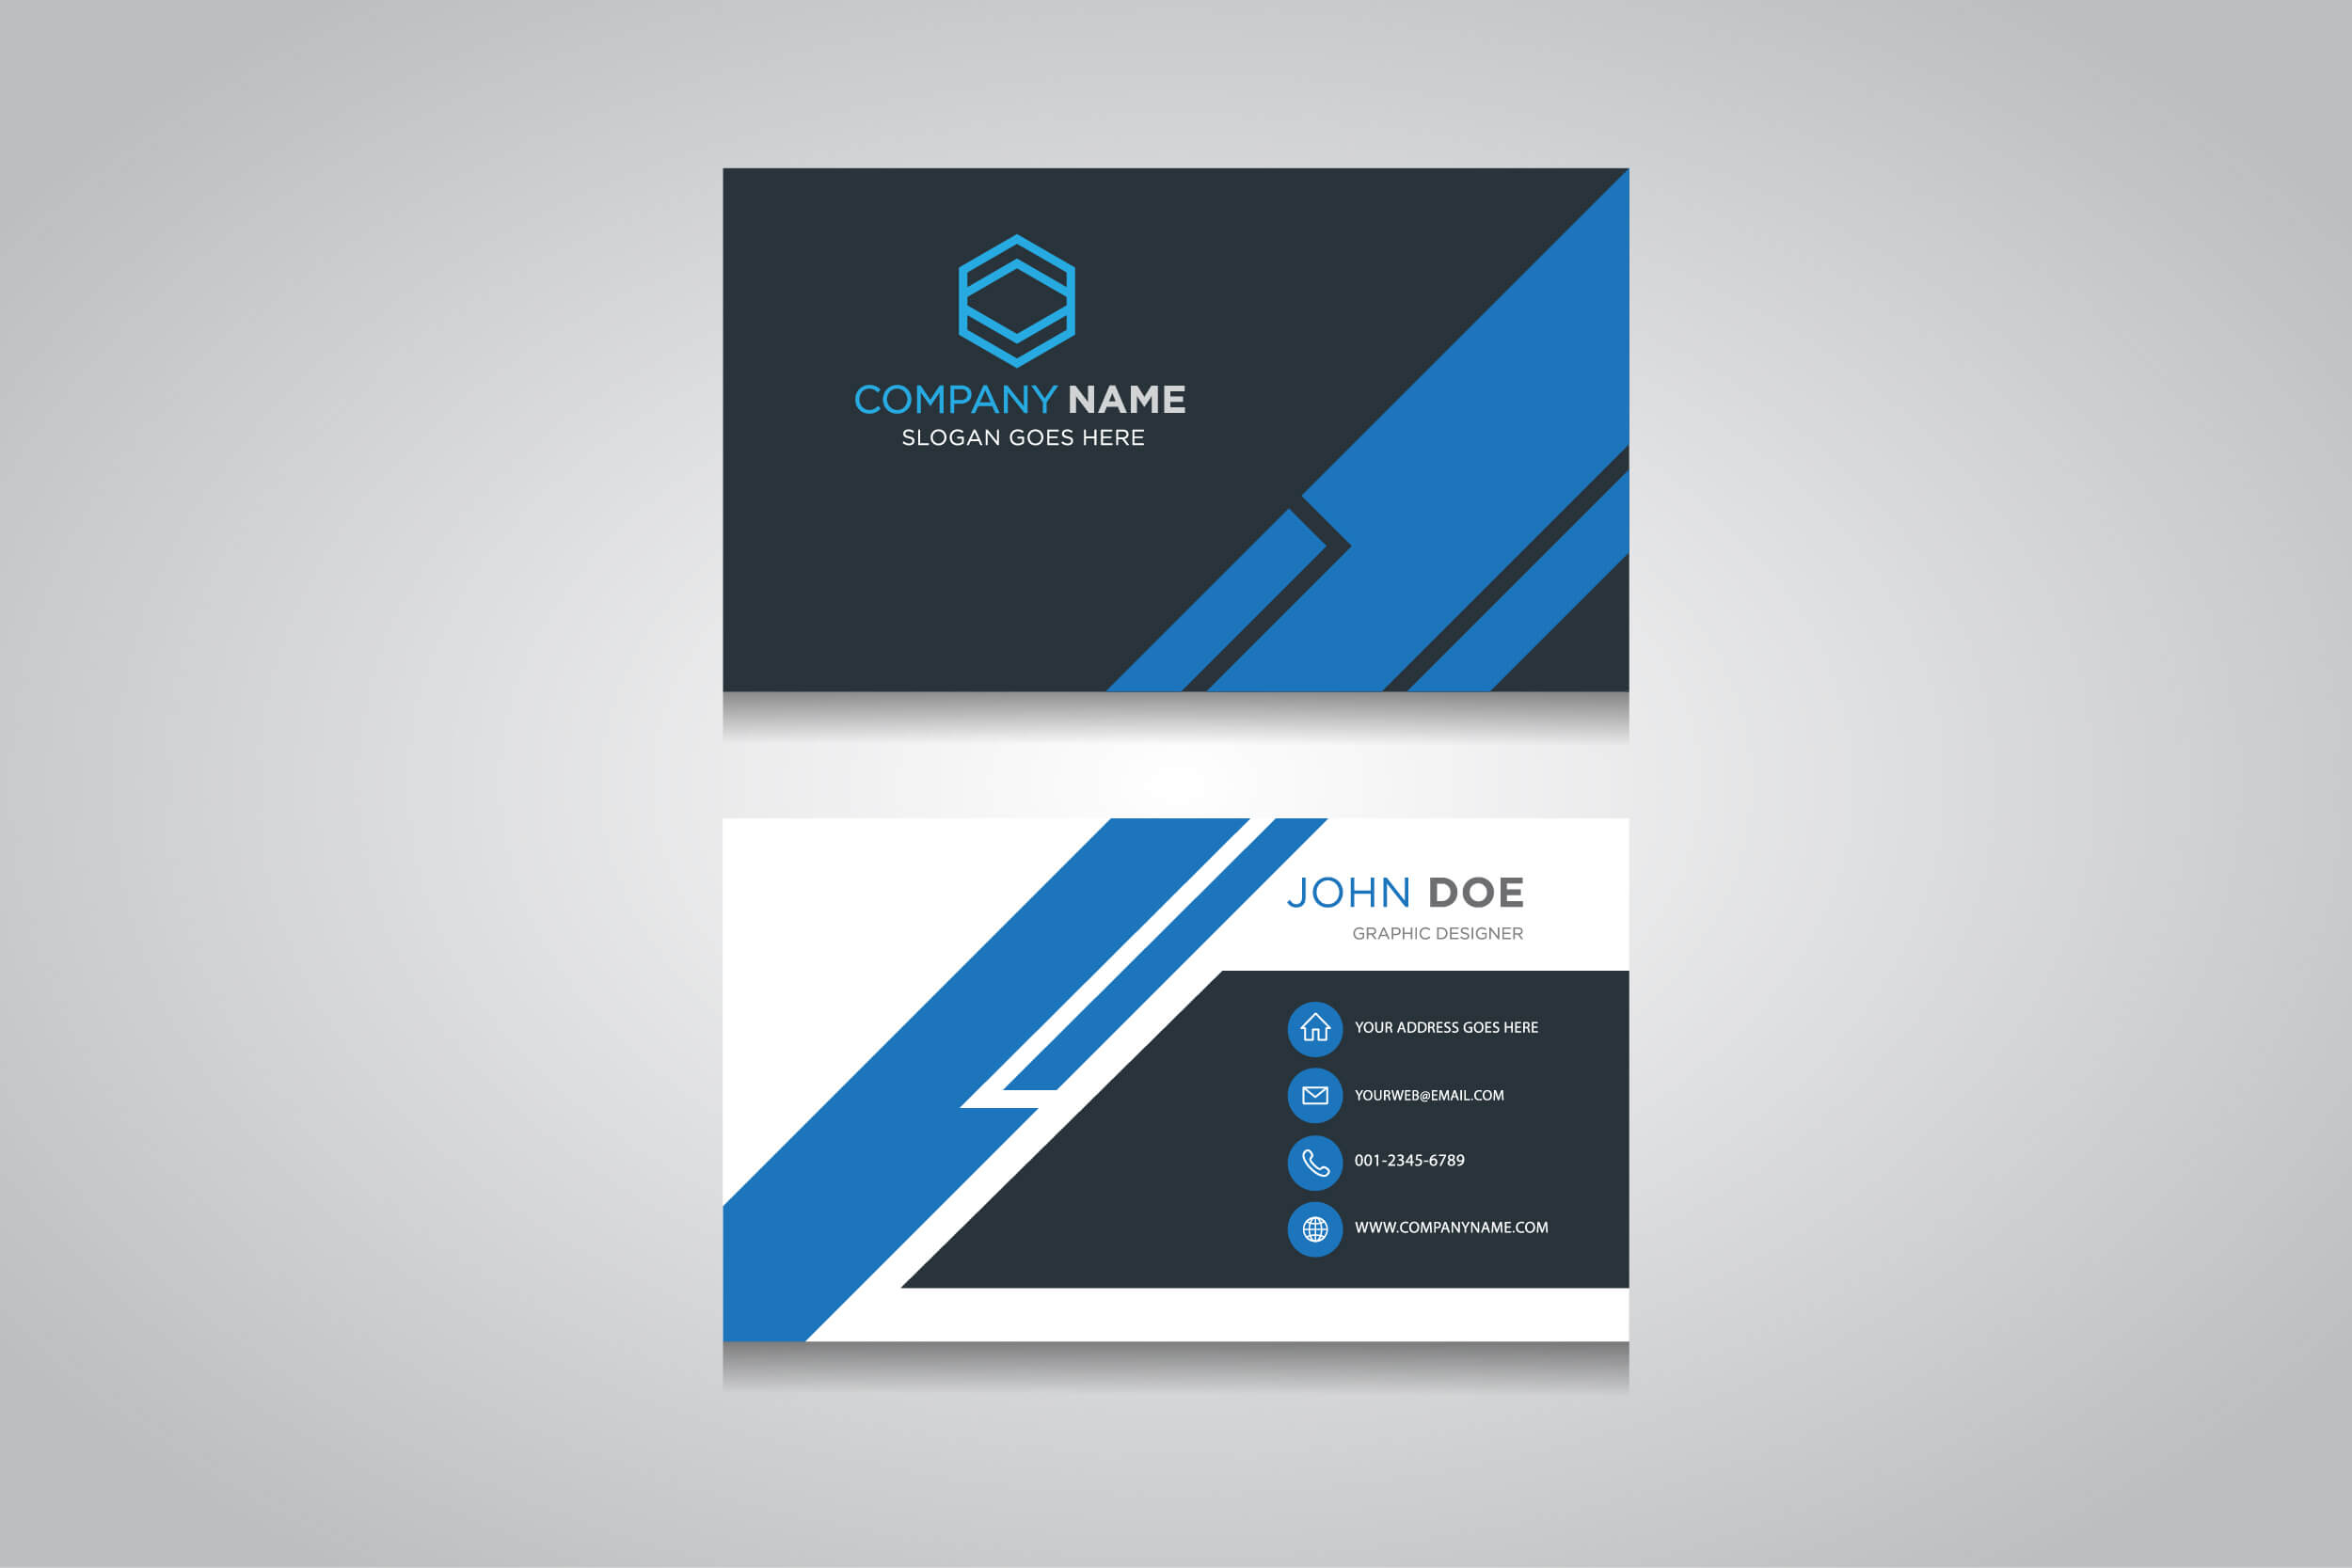 Business Card Template. Creative Business Card Throughout Web Design Business Cards Templates